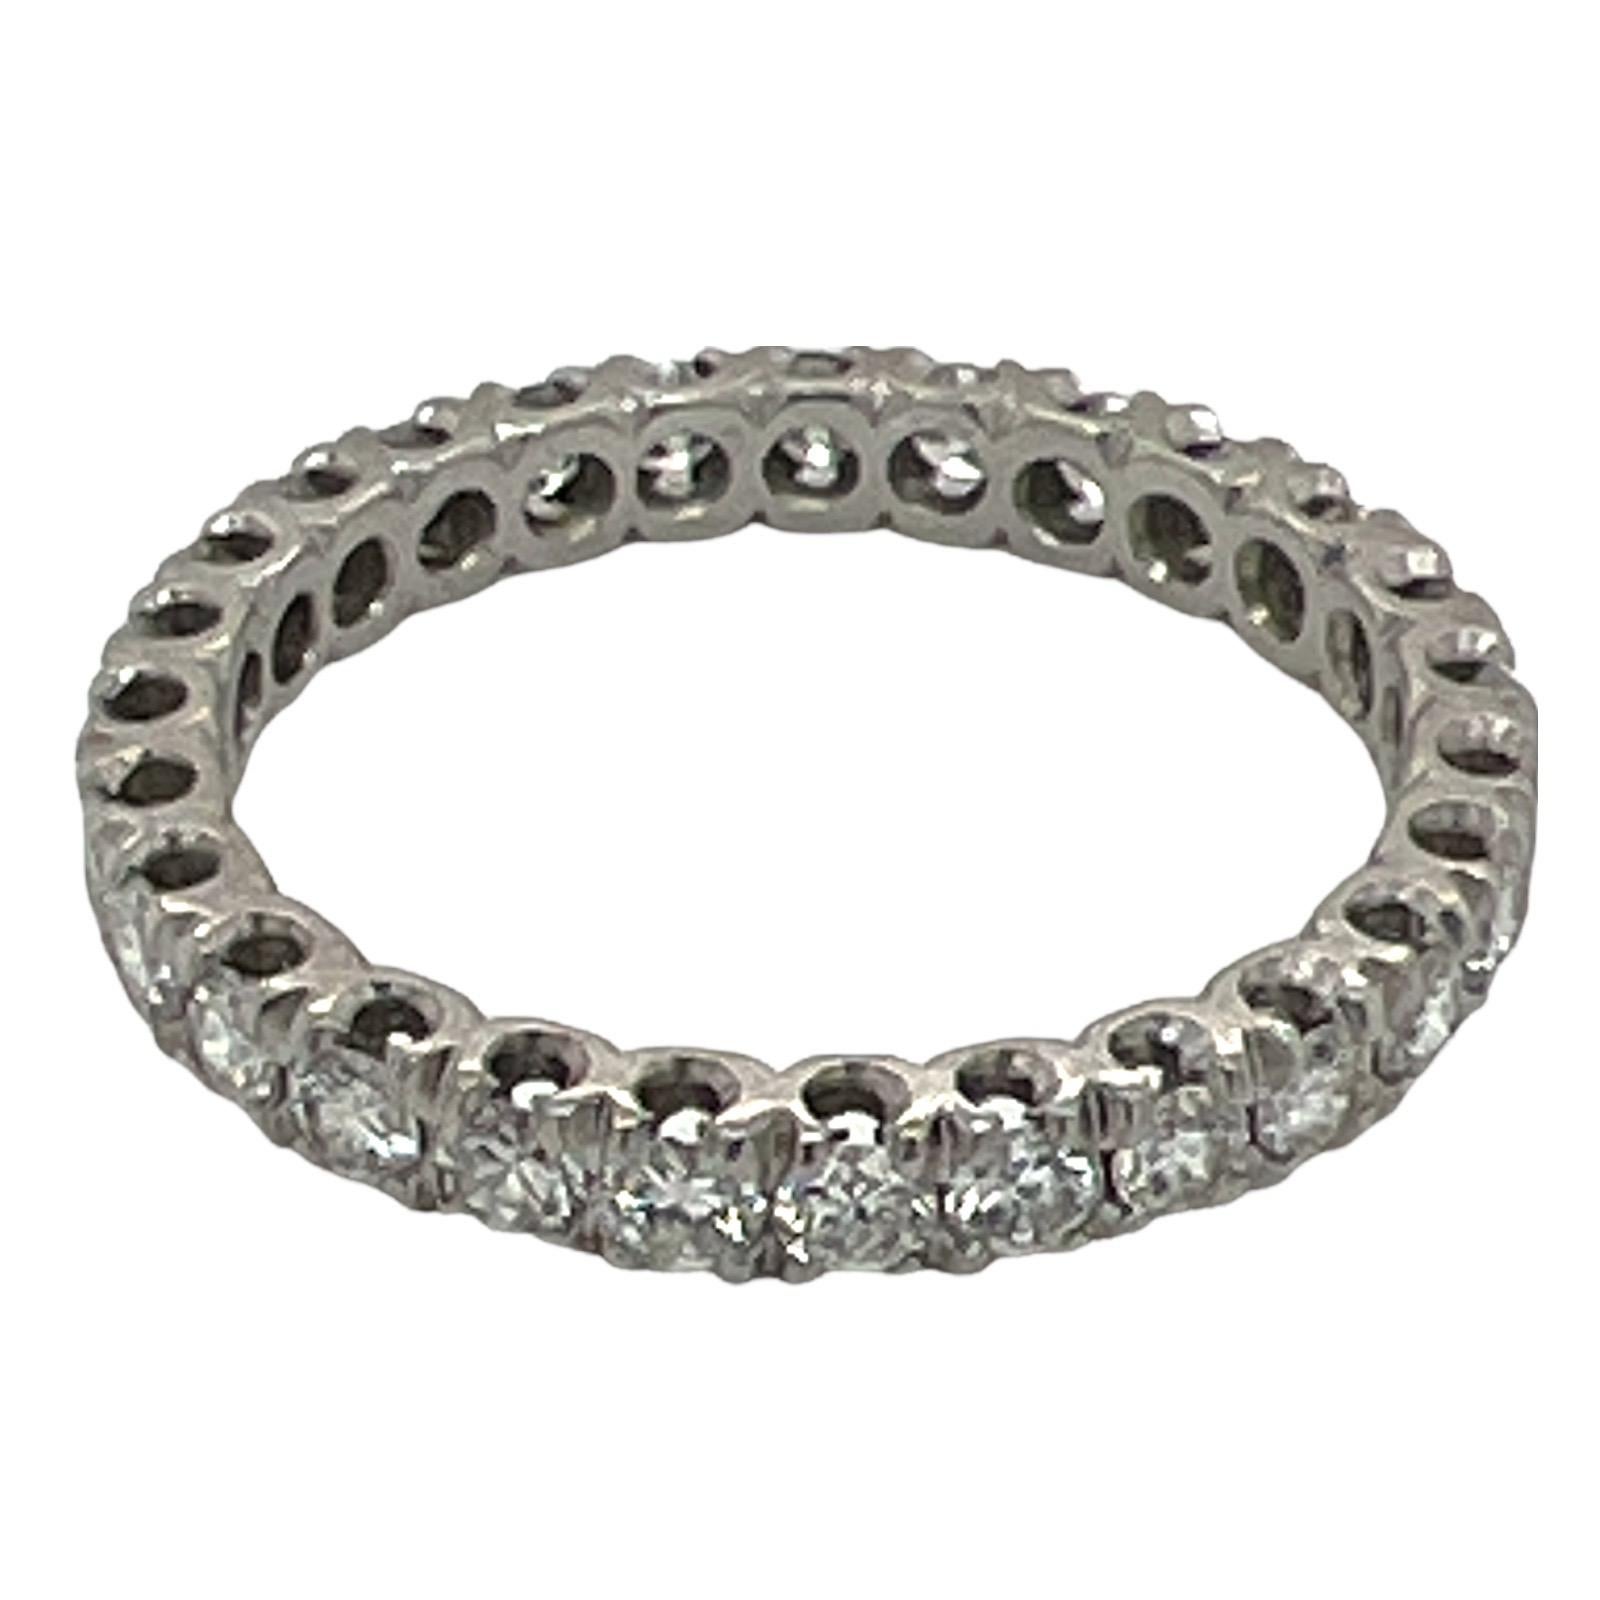 Diamond wedding eternity band crafted in platinum. The ring is set with 27 round brilliant cut diamonds weighing approximately 1.35 carat total weight. The diamonds are graded G-H color and VS clarity. The shared prong mounting measures 2.8mm in